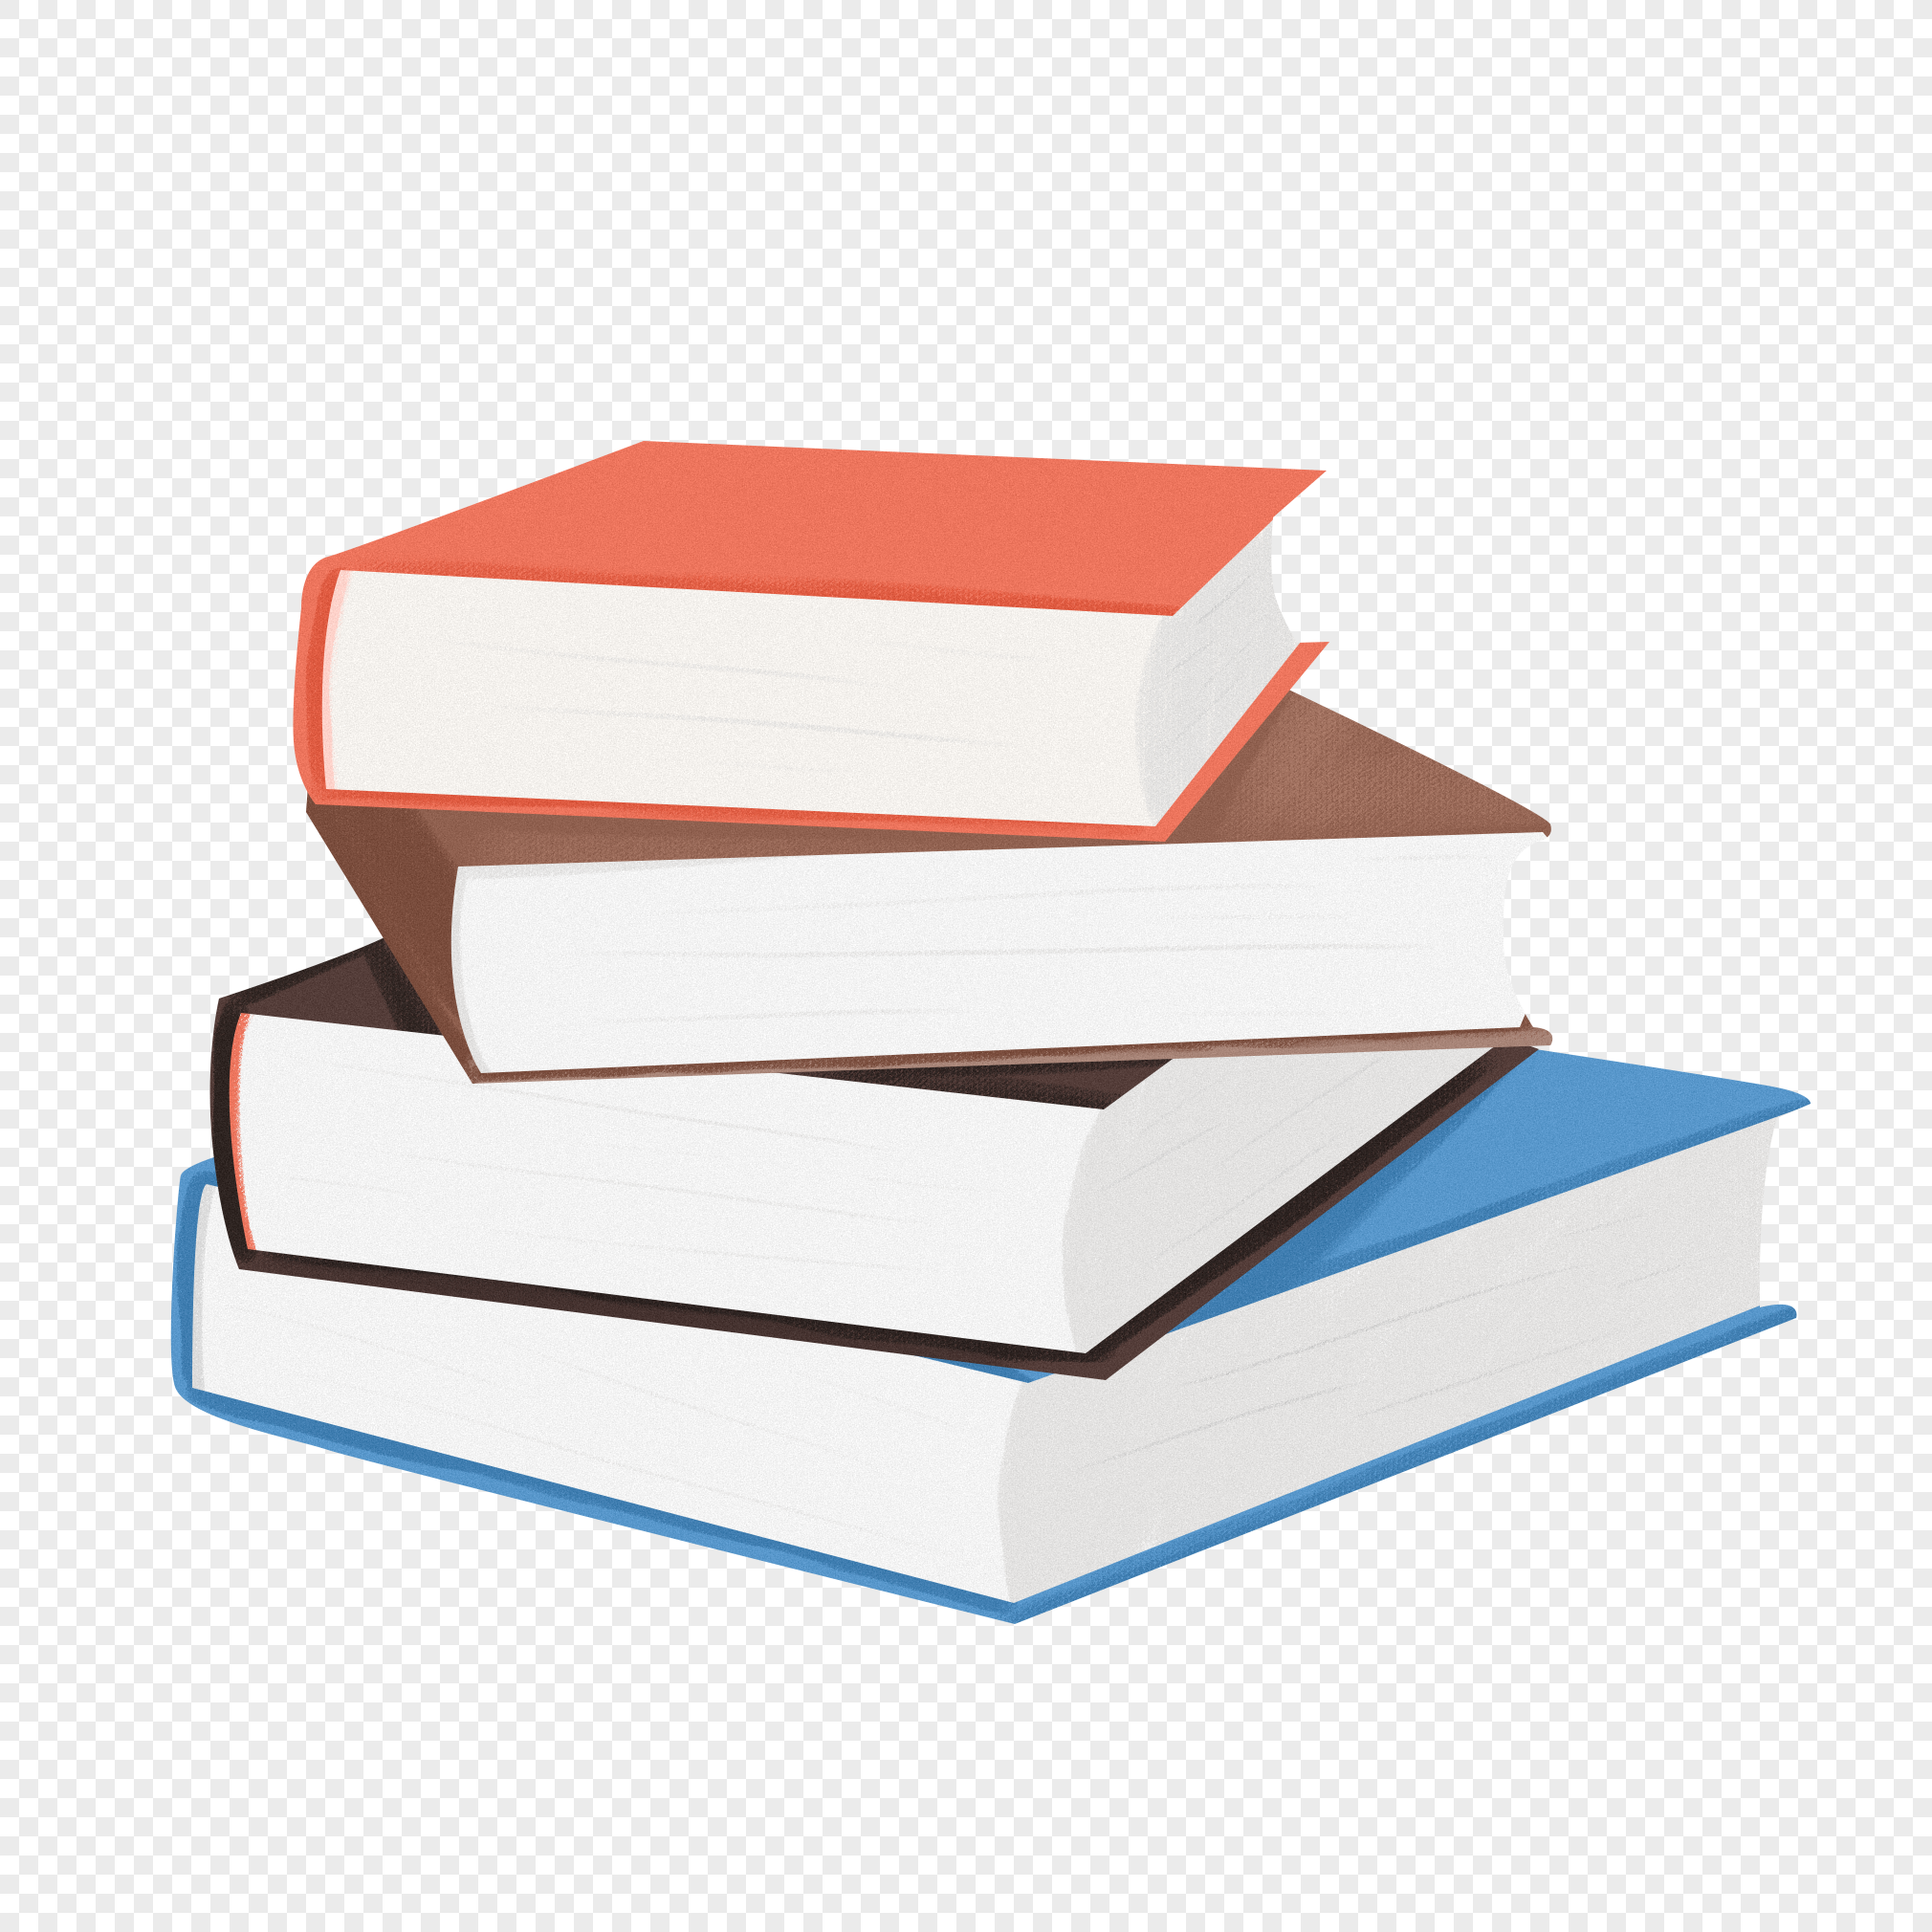 a stack of book material, material, book, stack of paper png hd transparent image